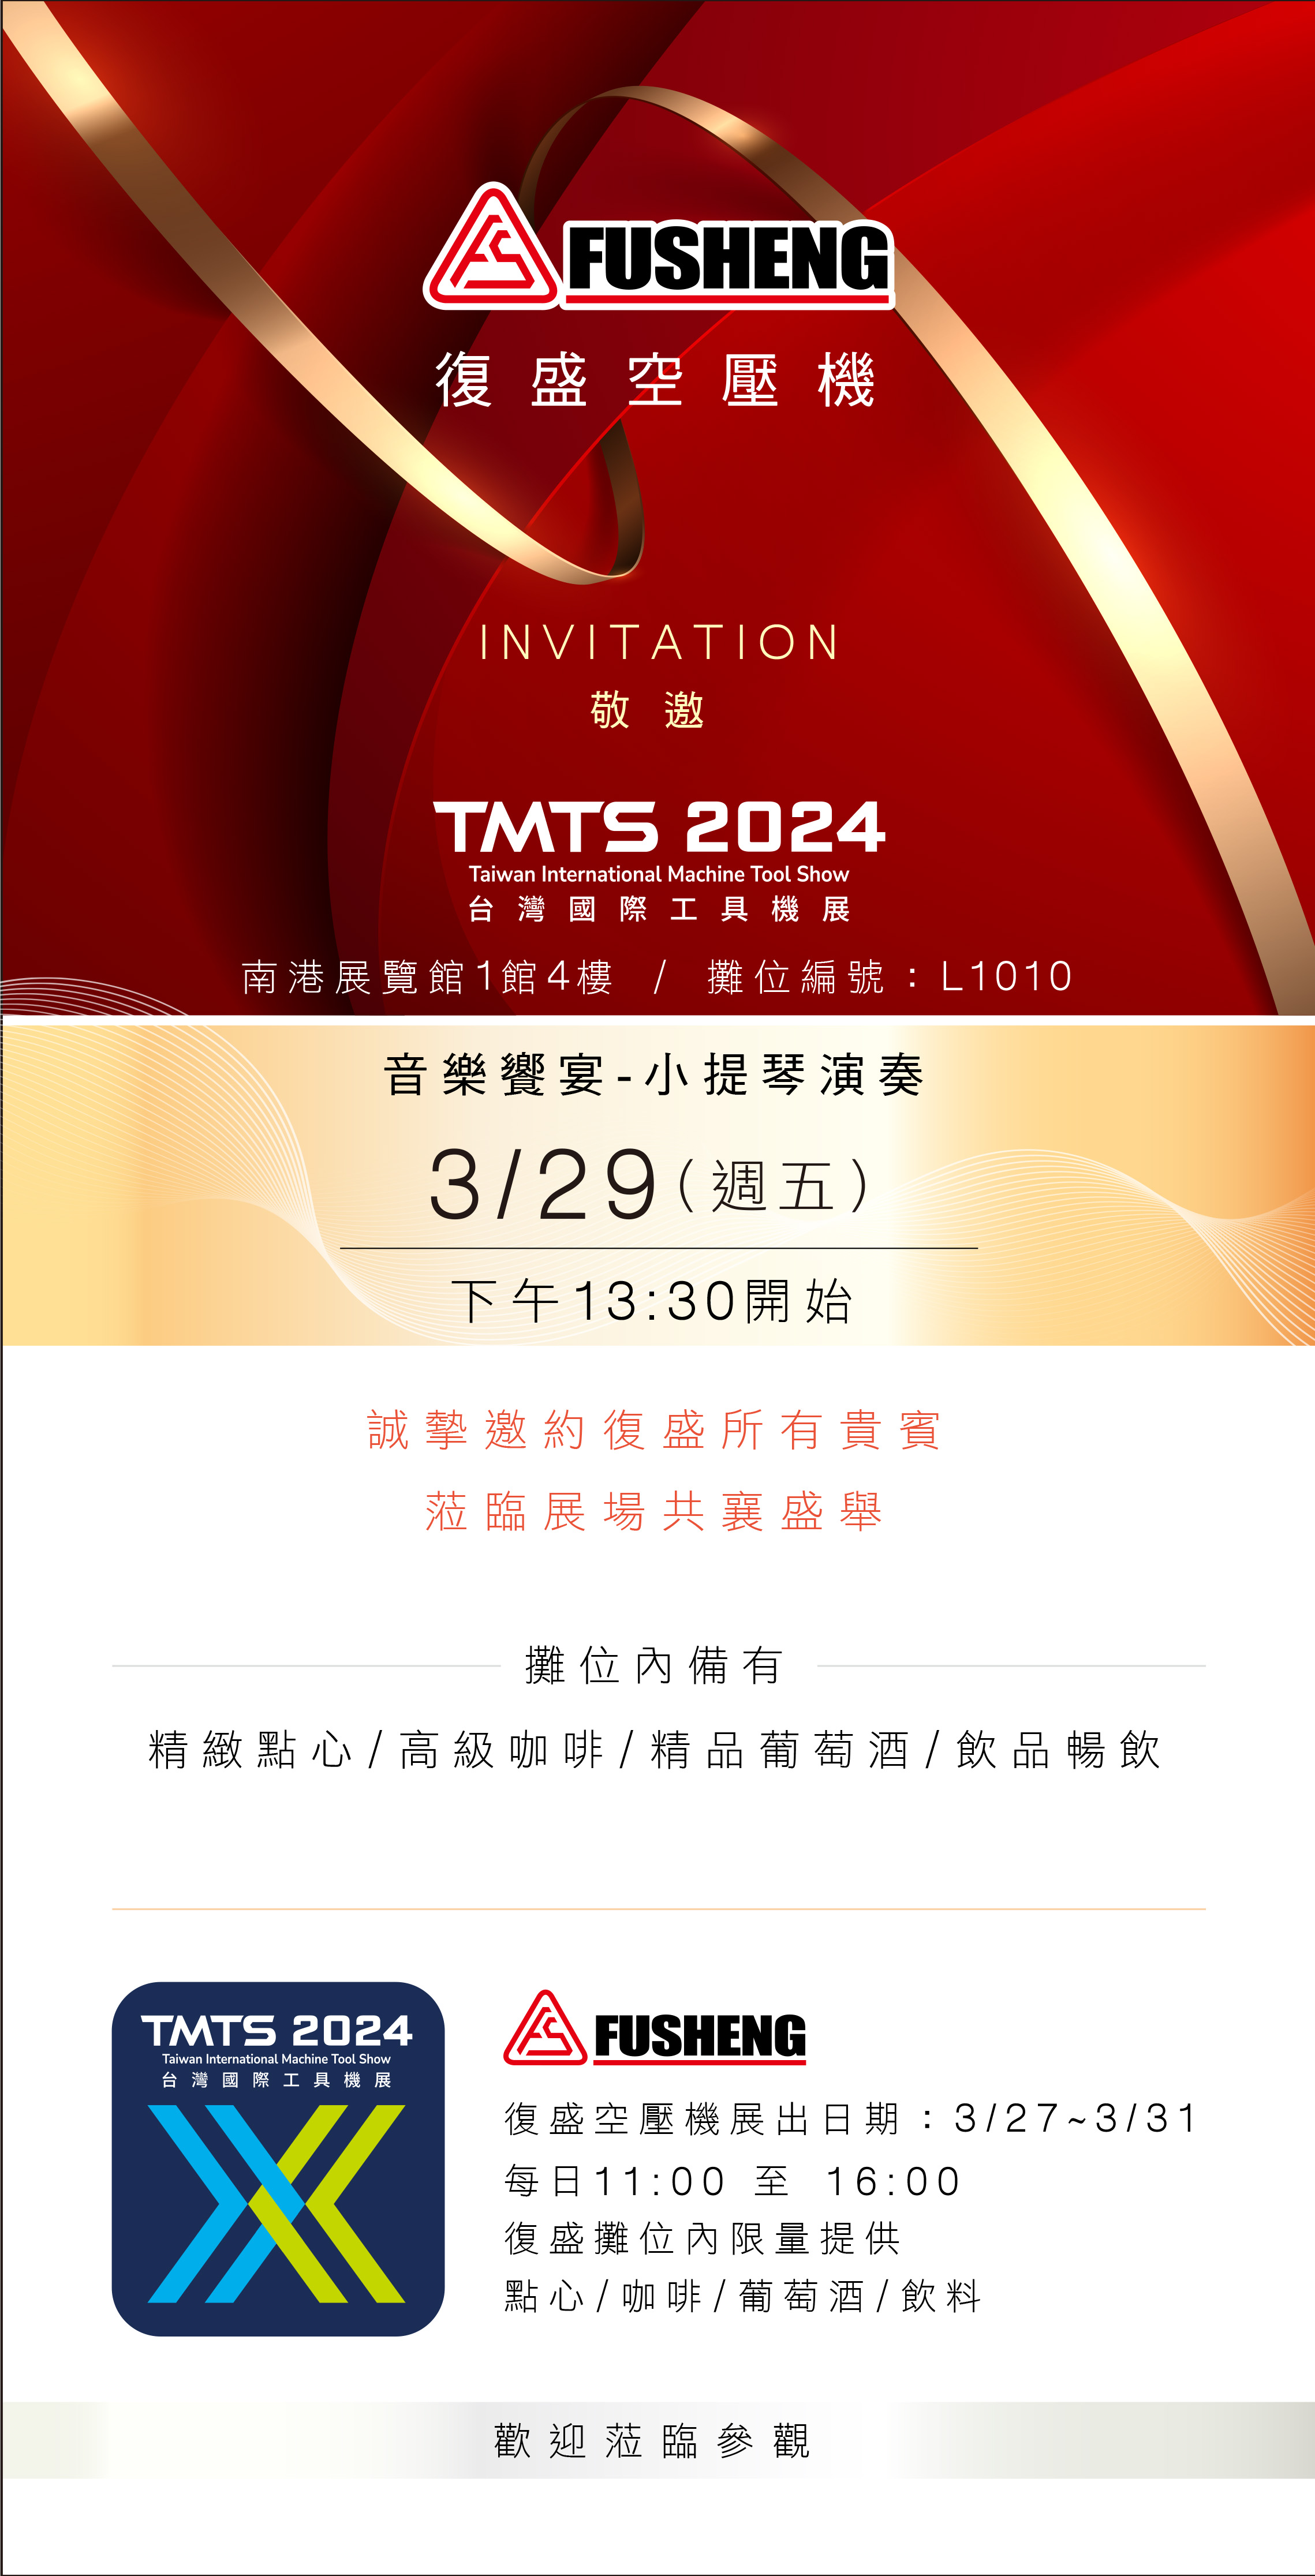 ind_images/Exhibitions/2024/TMTS_2024復盛邀請卡-20230321A.jpg